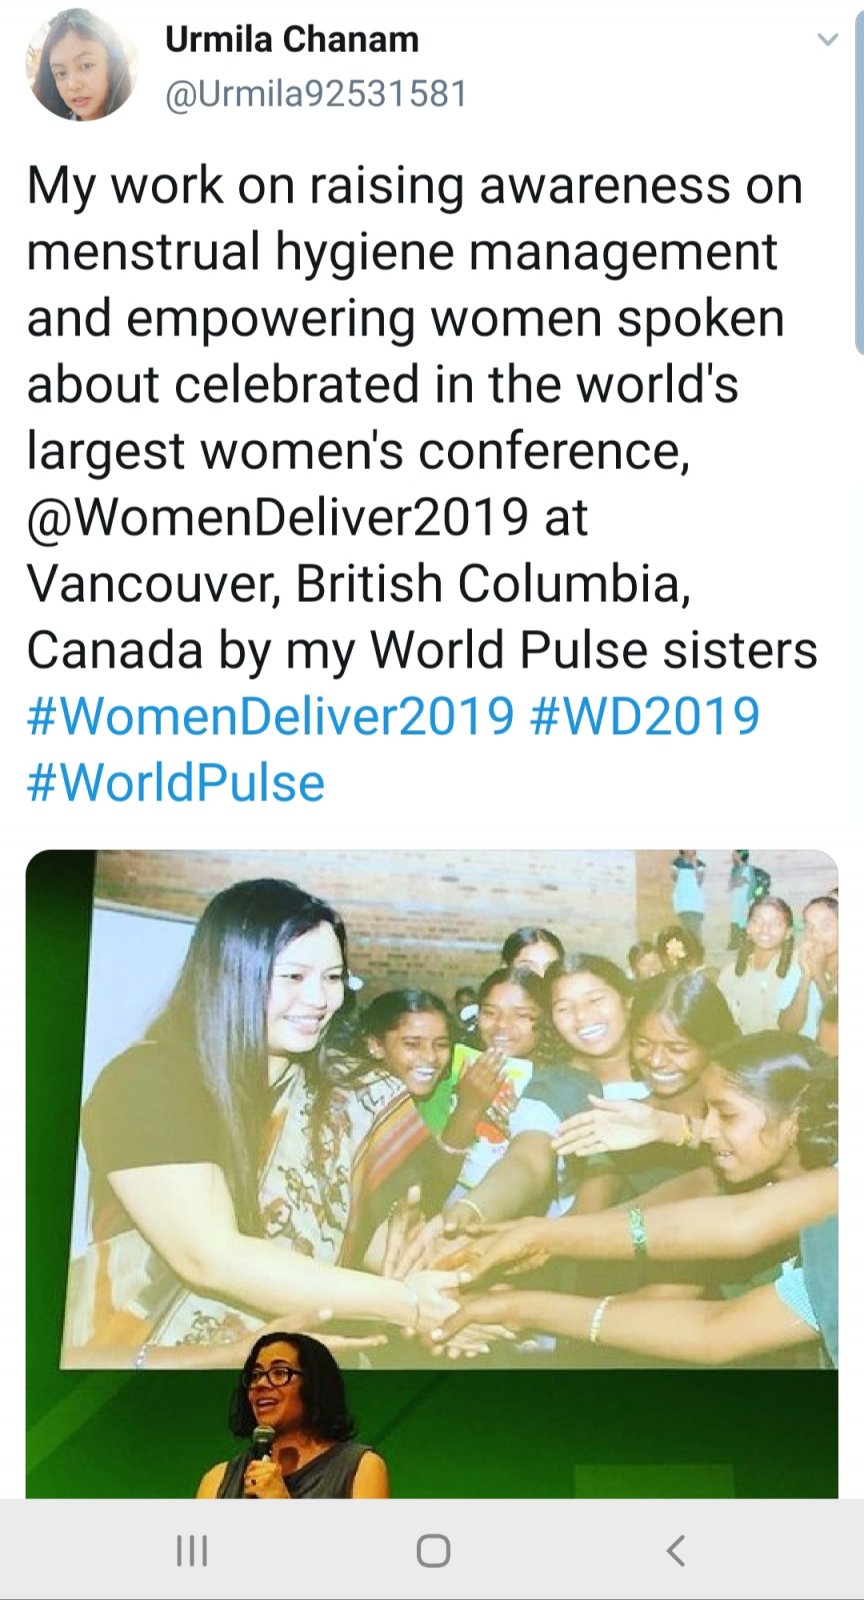 My activities within World Pulse do not have to remain within World Pulse. If shared on other social media forums, like Twitter, it serves to introduce readers and your followers to World Pulse. You can mention www.worldpulse.com in these tweets.